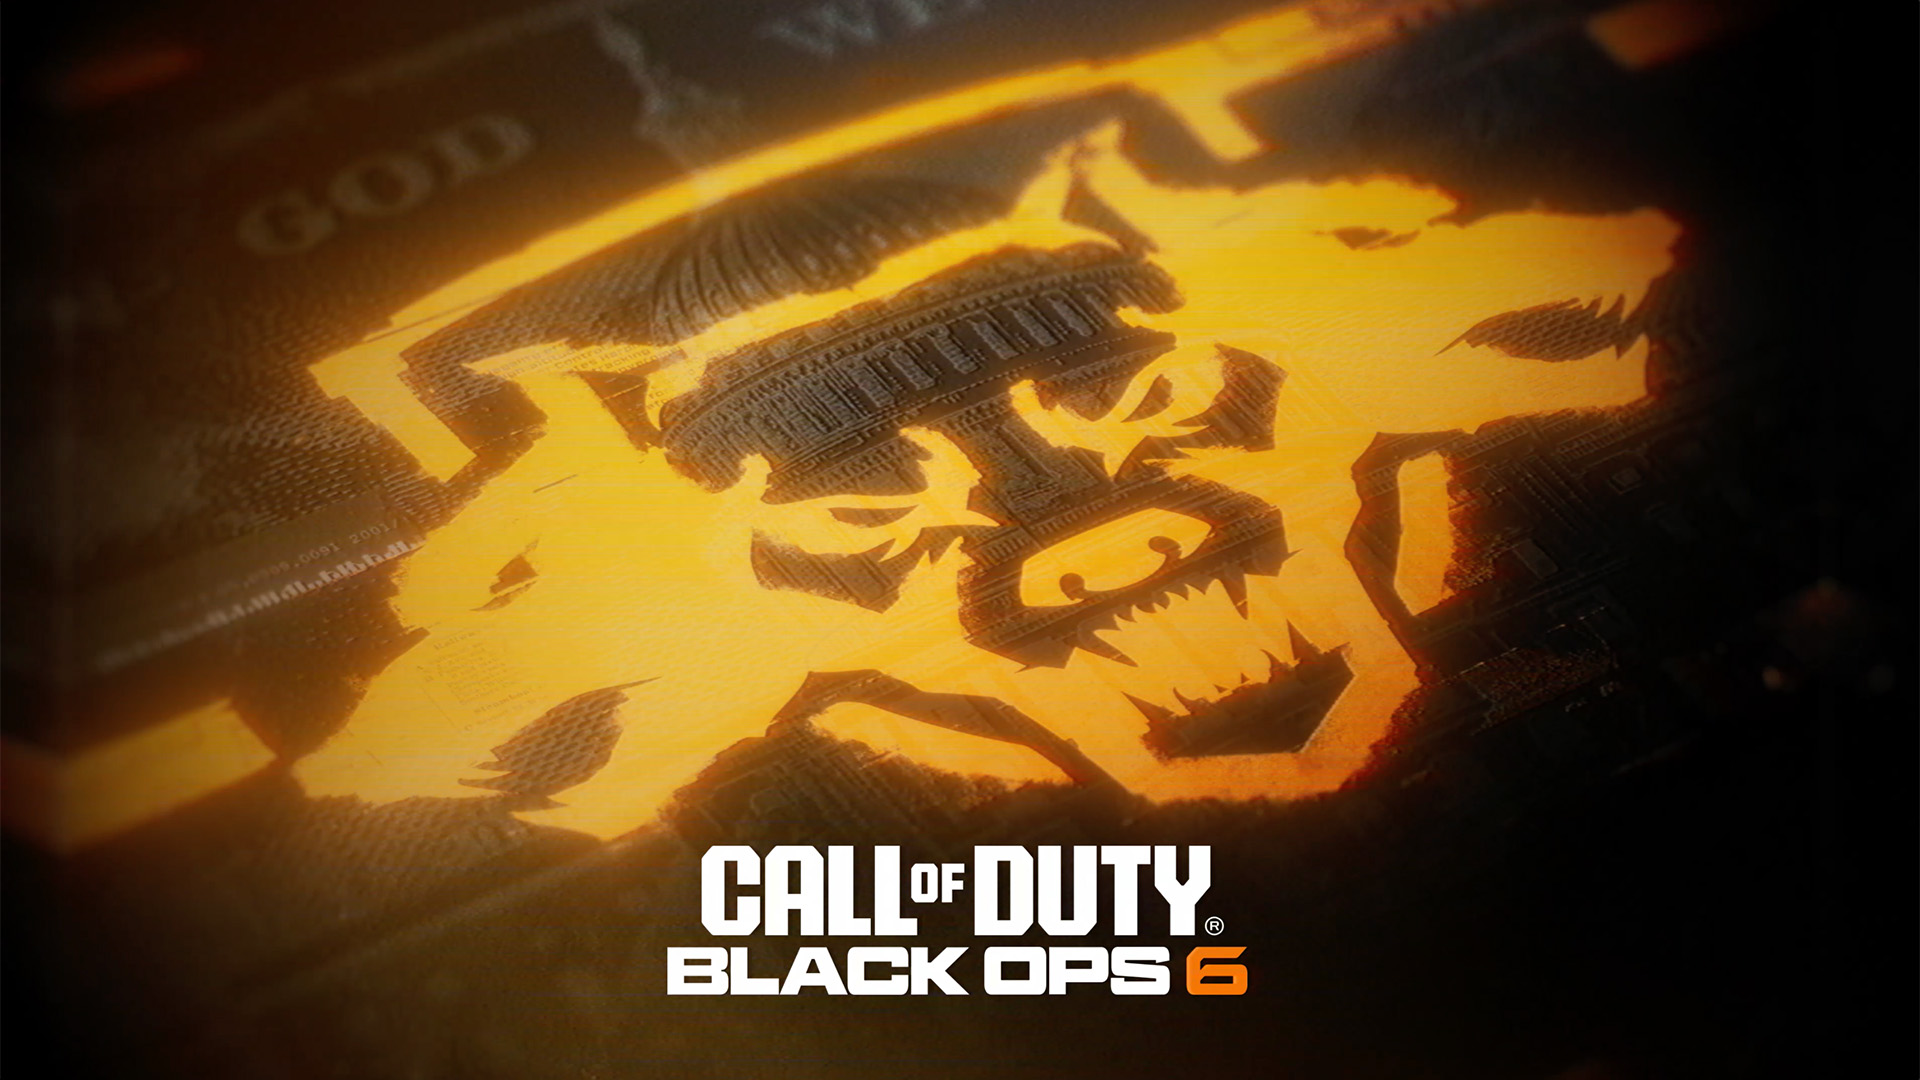 Call of Duty: Black Ops 6 coming to Game Pass on Day-1 – Microsoft Confirms